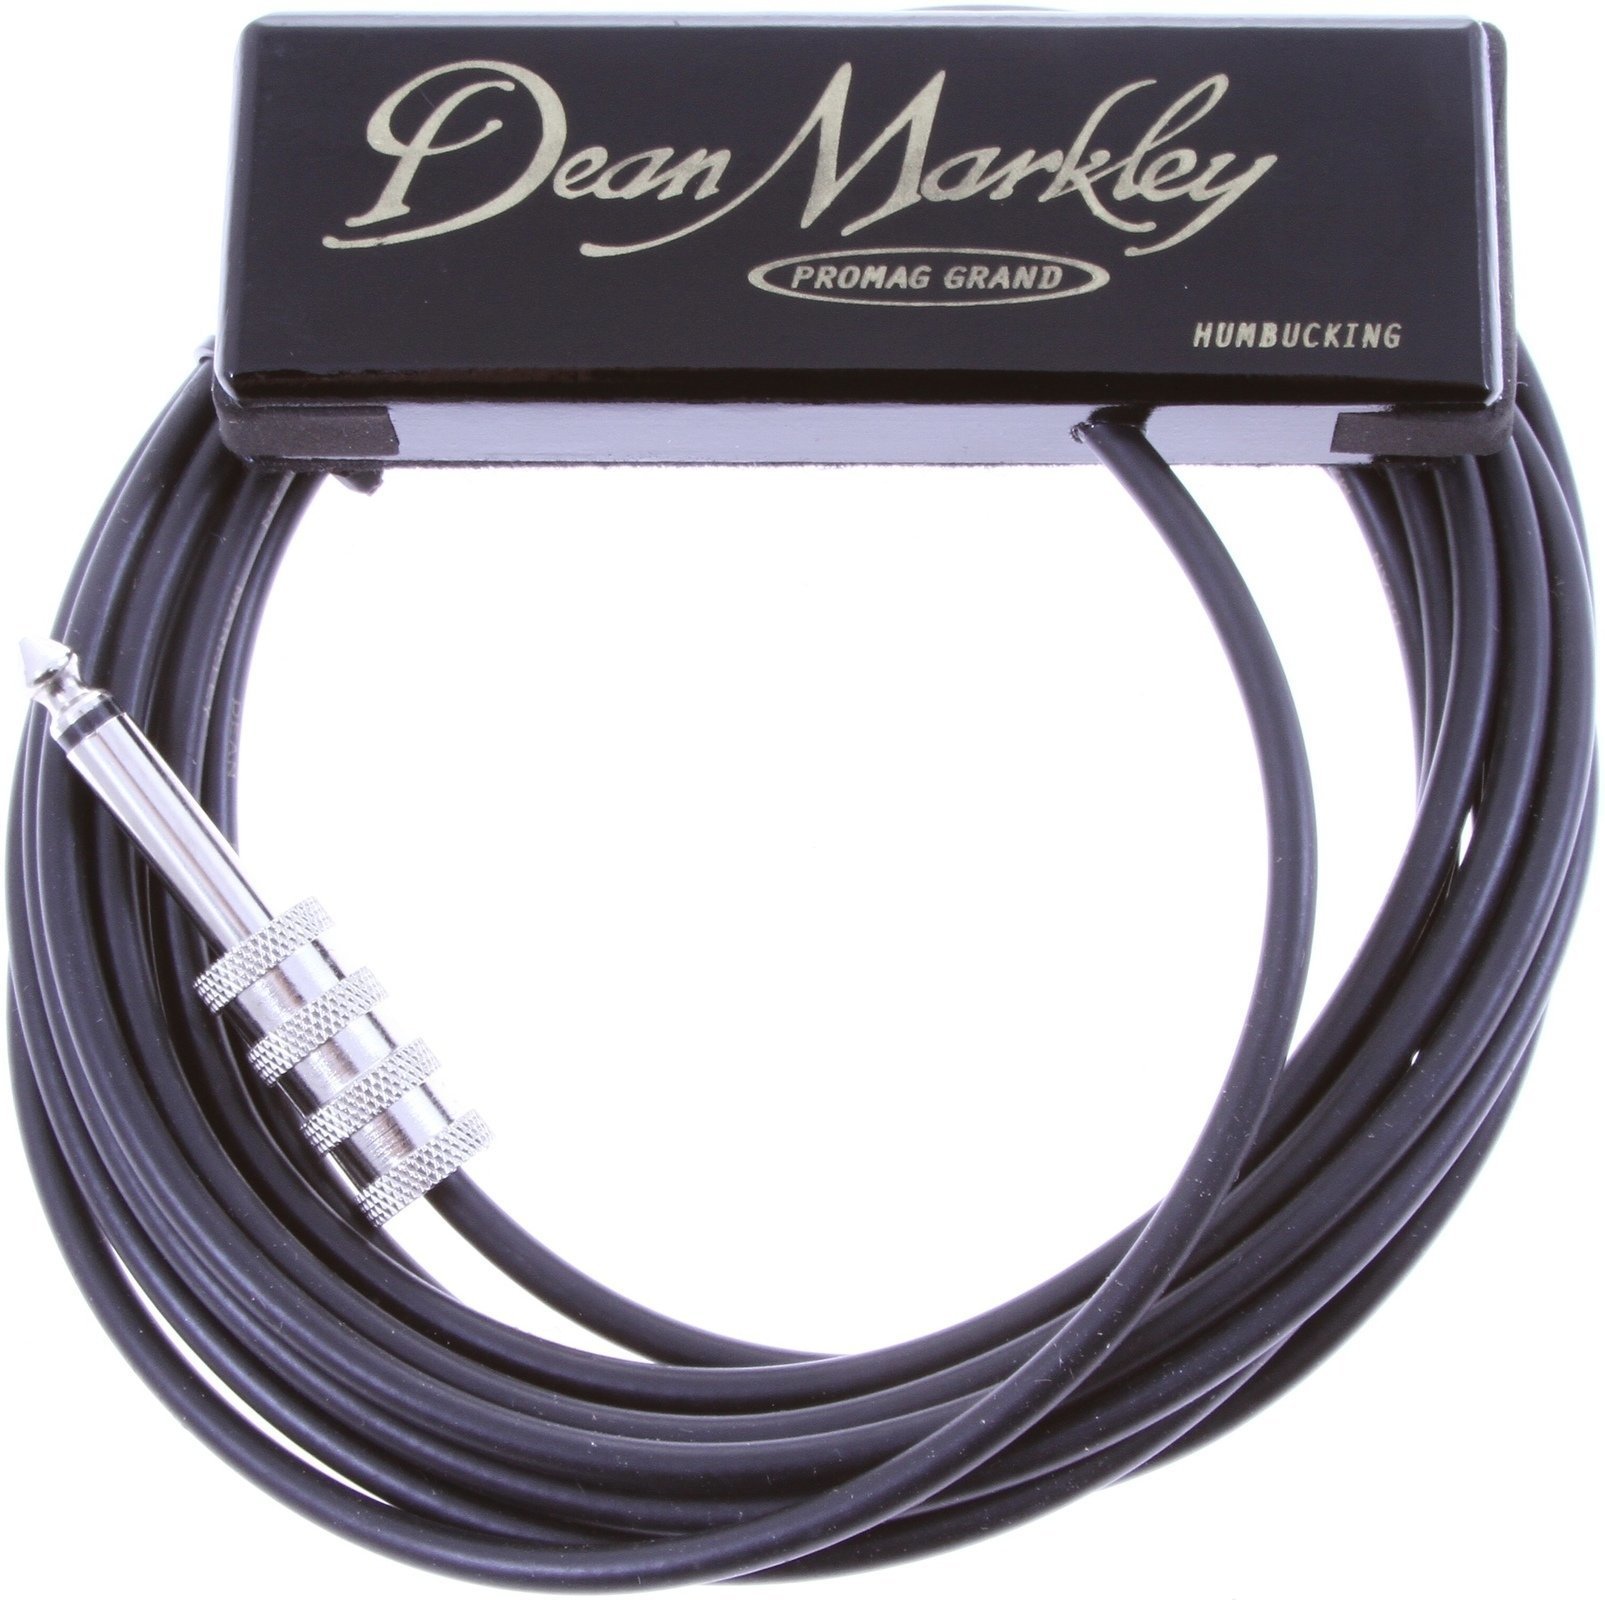 Pickup for Acoustic Guitar Dean Markley 3015 ProMag Grand